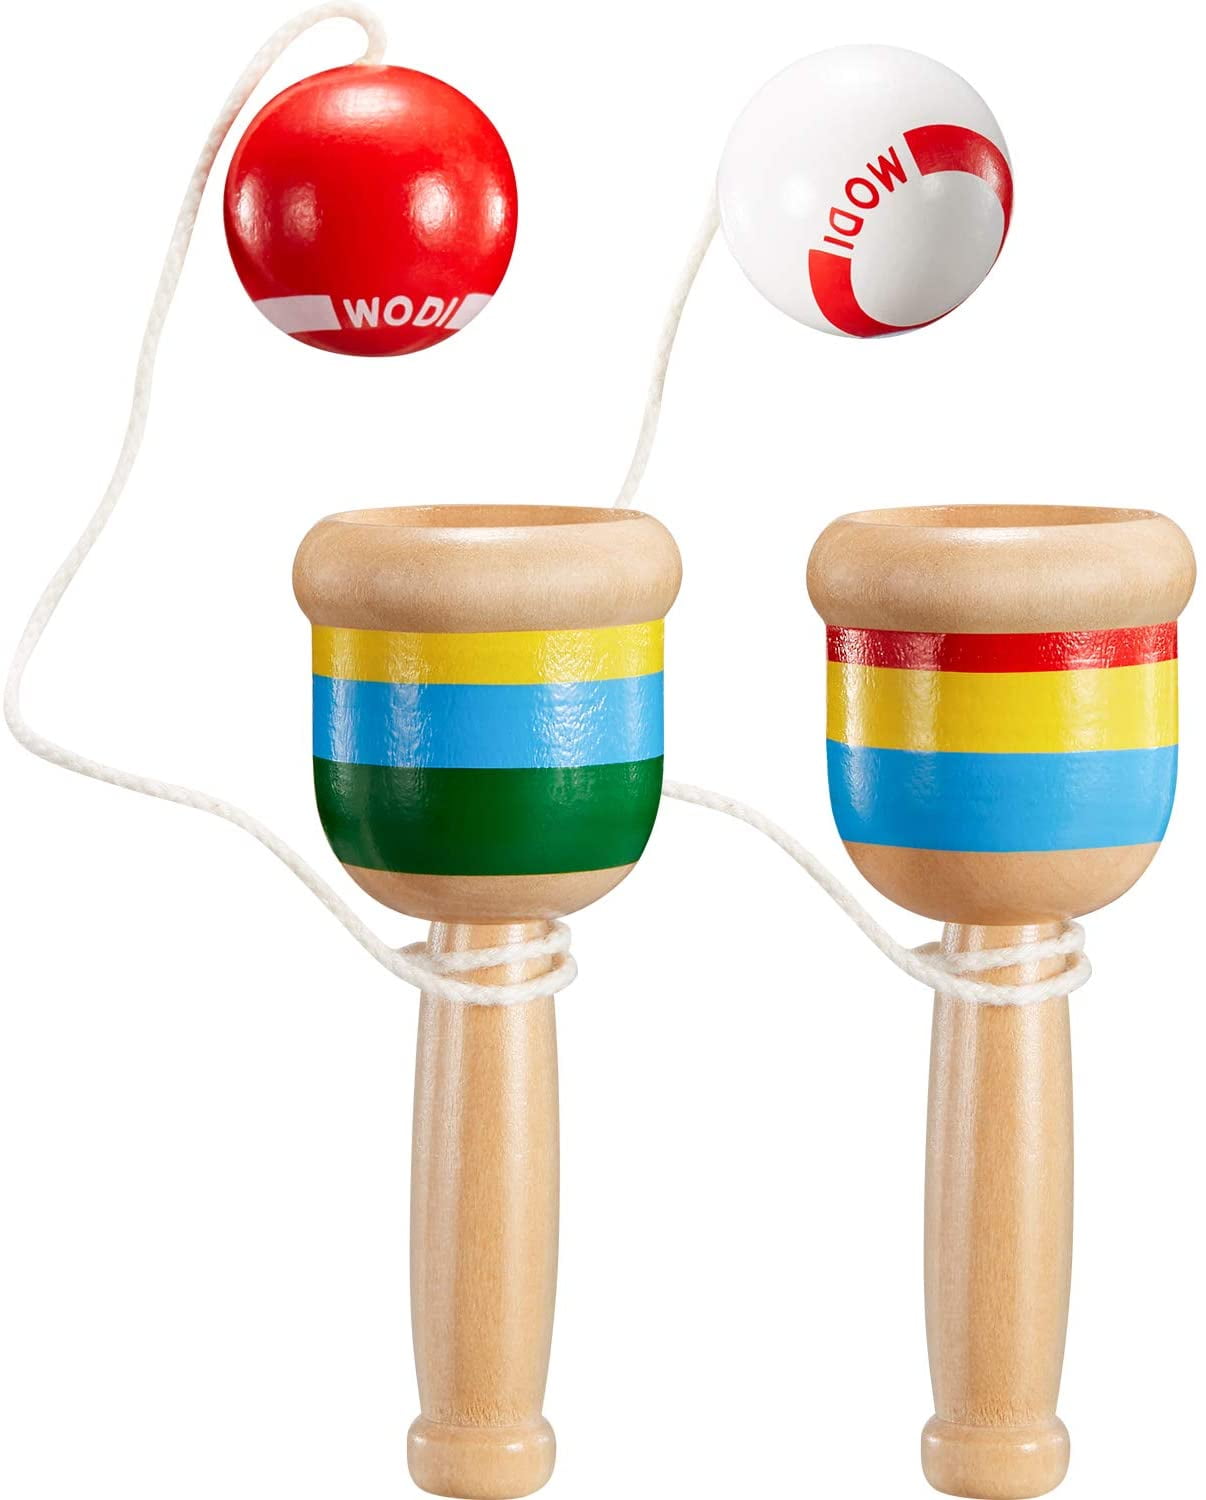 Wooden Ball and Cup Toys Catch Skill Game Kids Traditional Hand Eye Coordination 